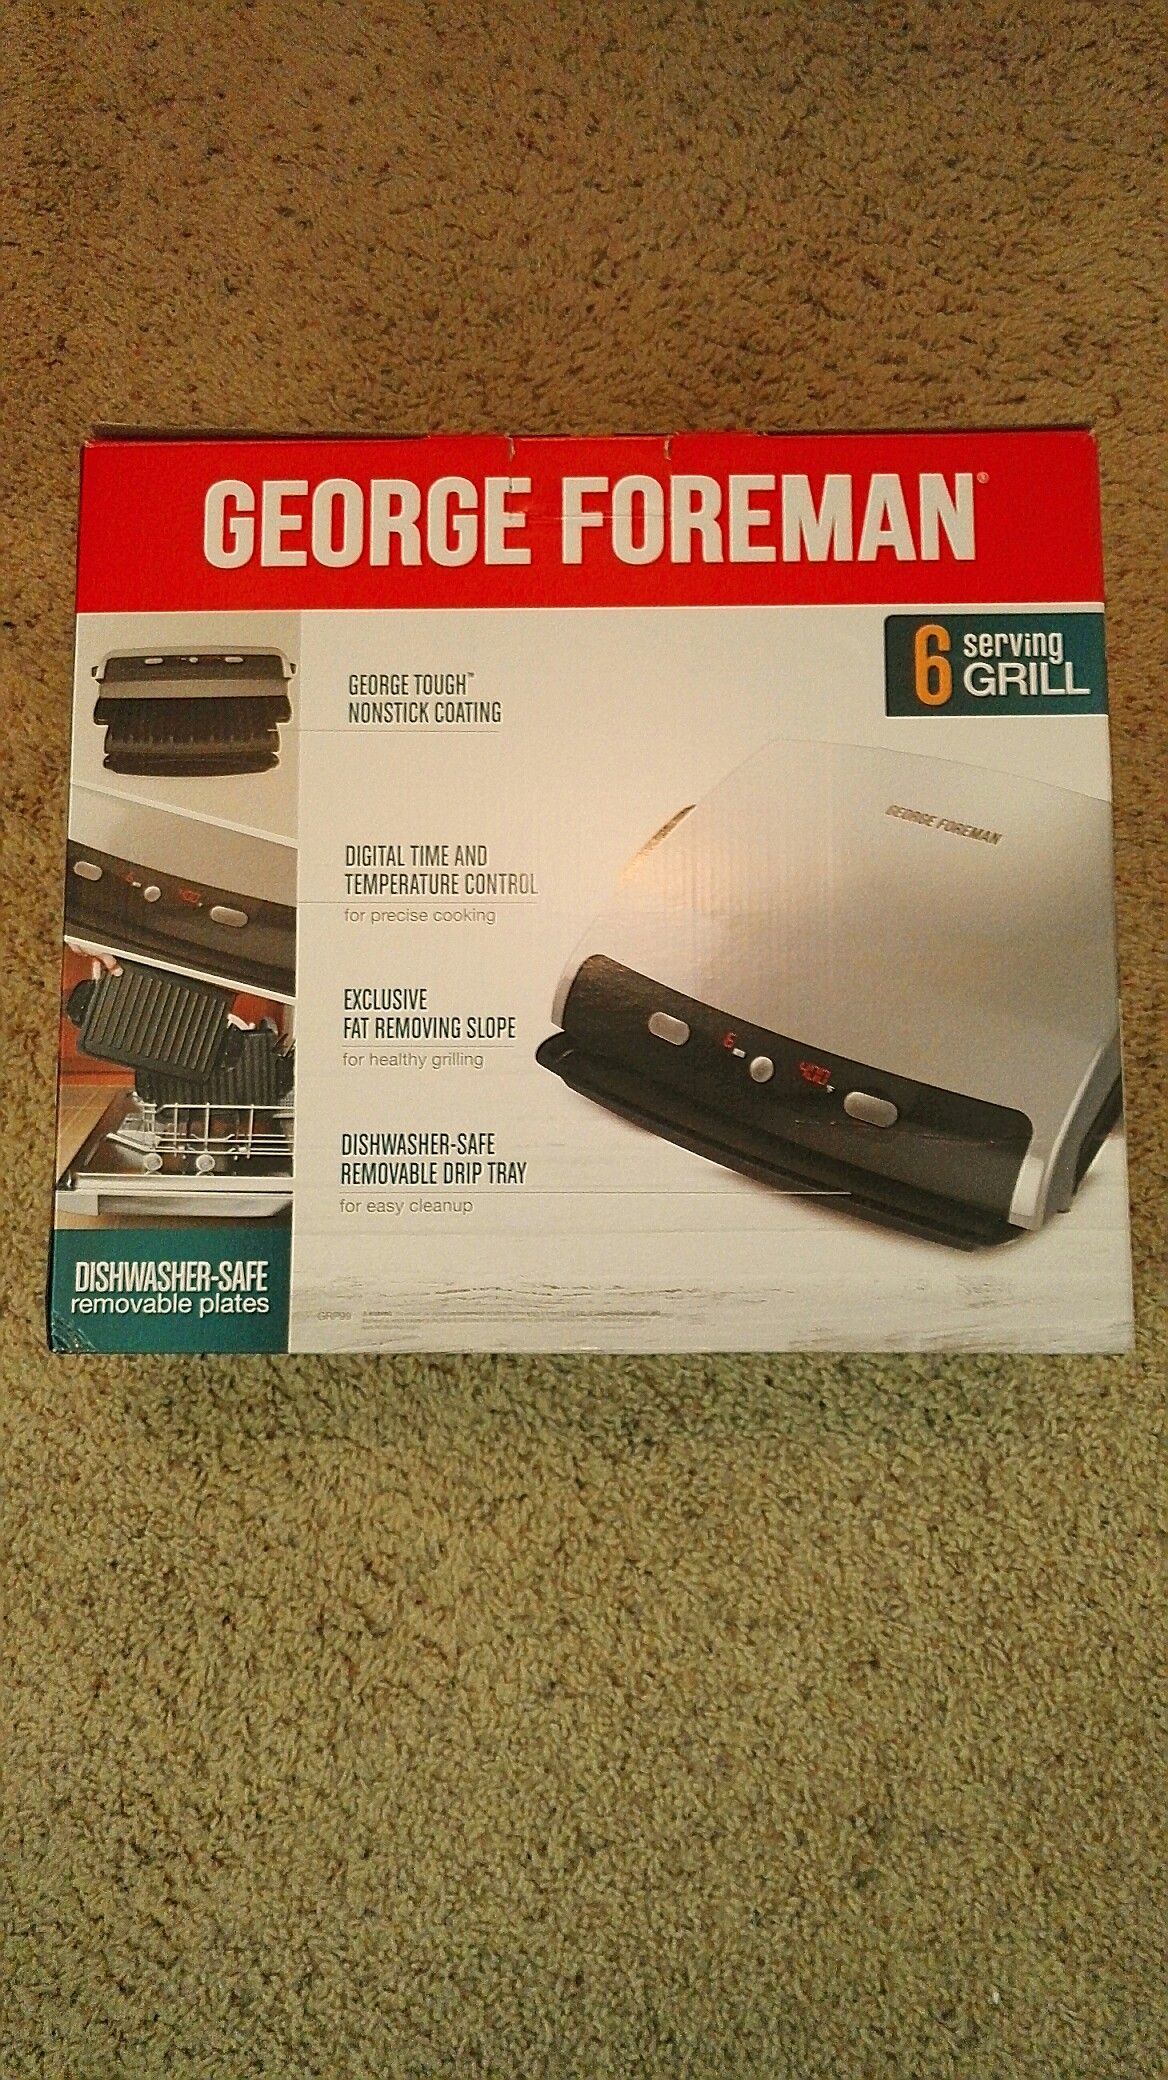 *NEW* GEORGE FOREMAN 6-grill with Panini Press